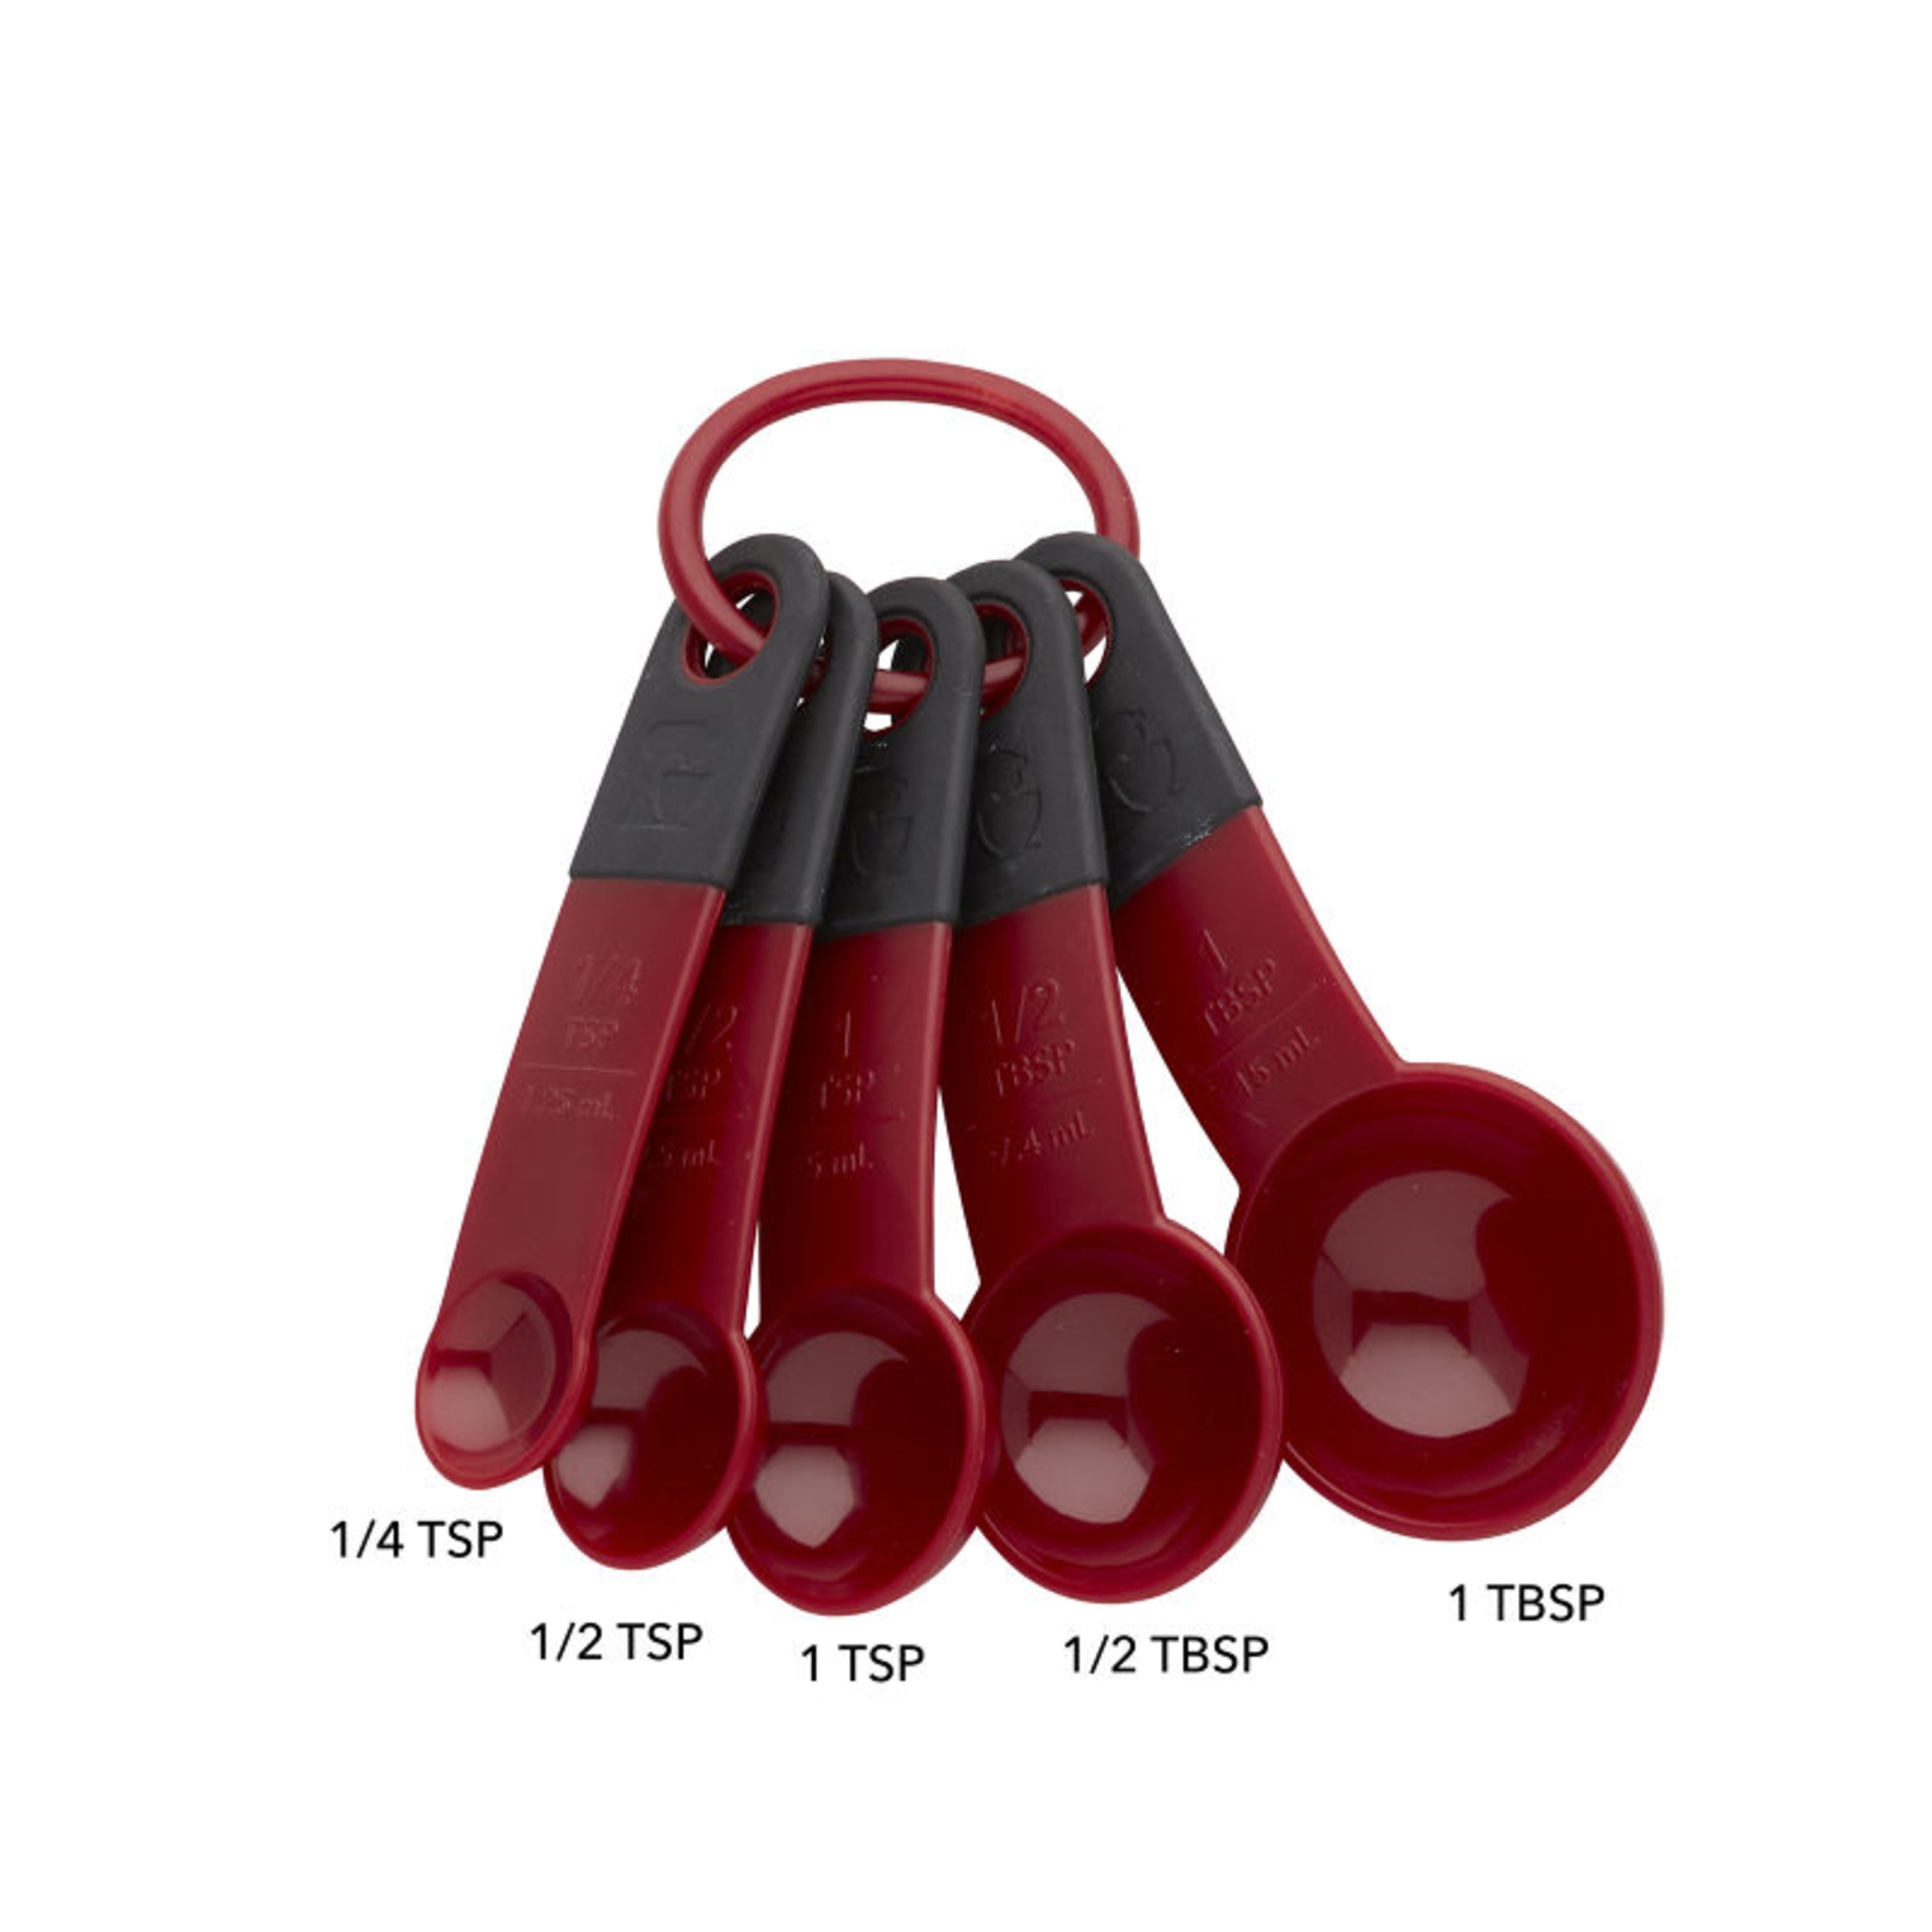 Tupperware Measuring Mates Set Cups and Spoons Chili Red